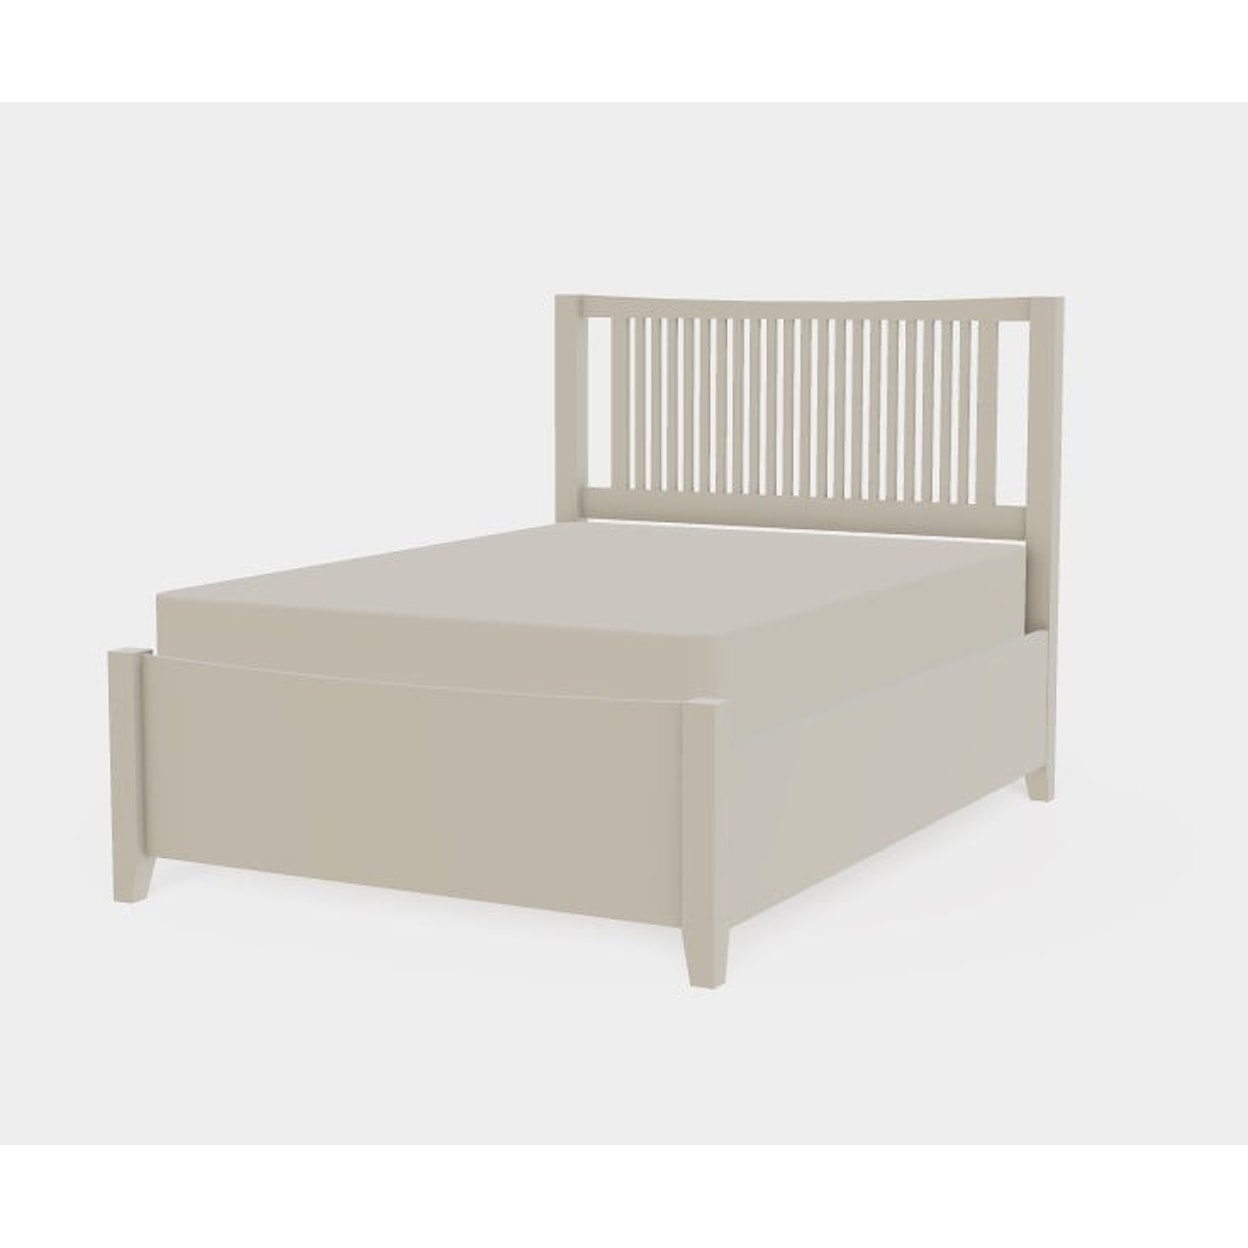 Mavin Atwood Group Atwood Full Left Drawerside Spindle Bed